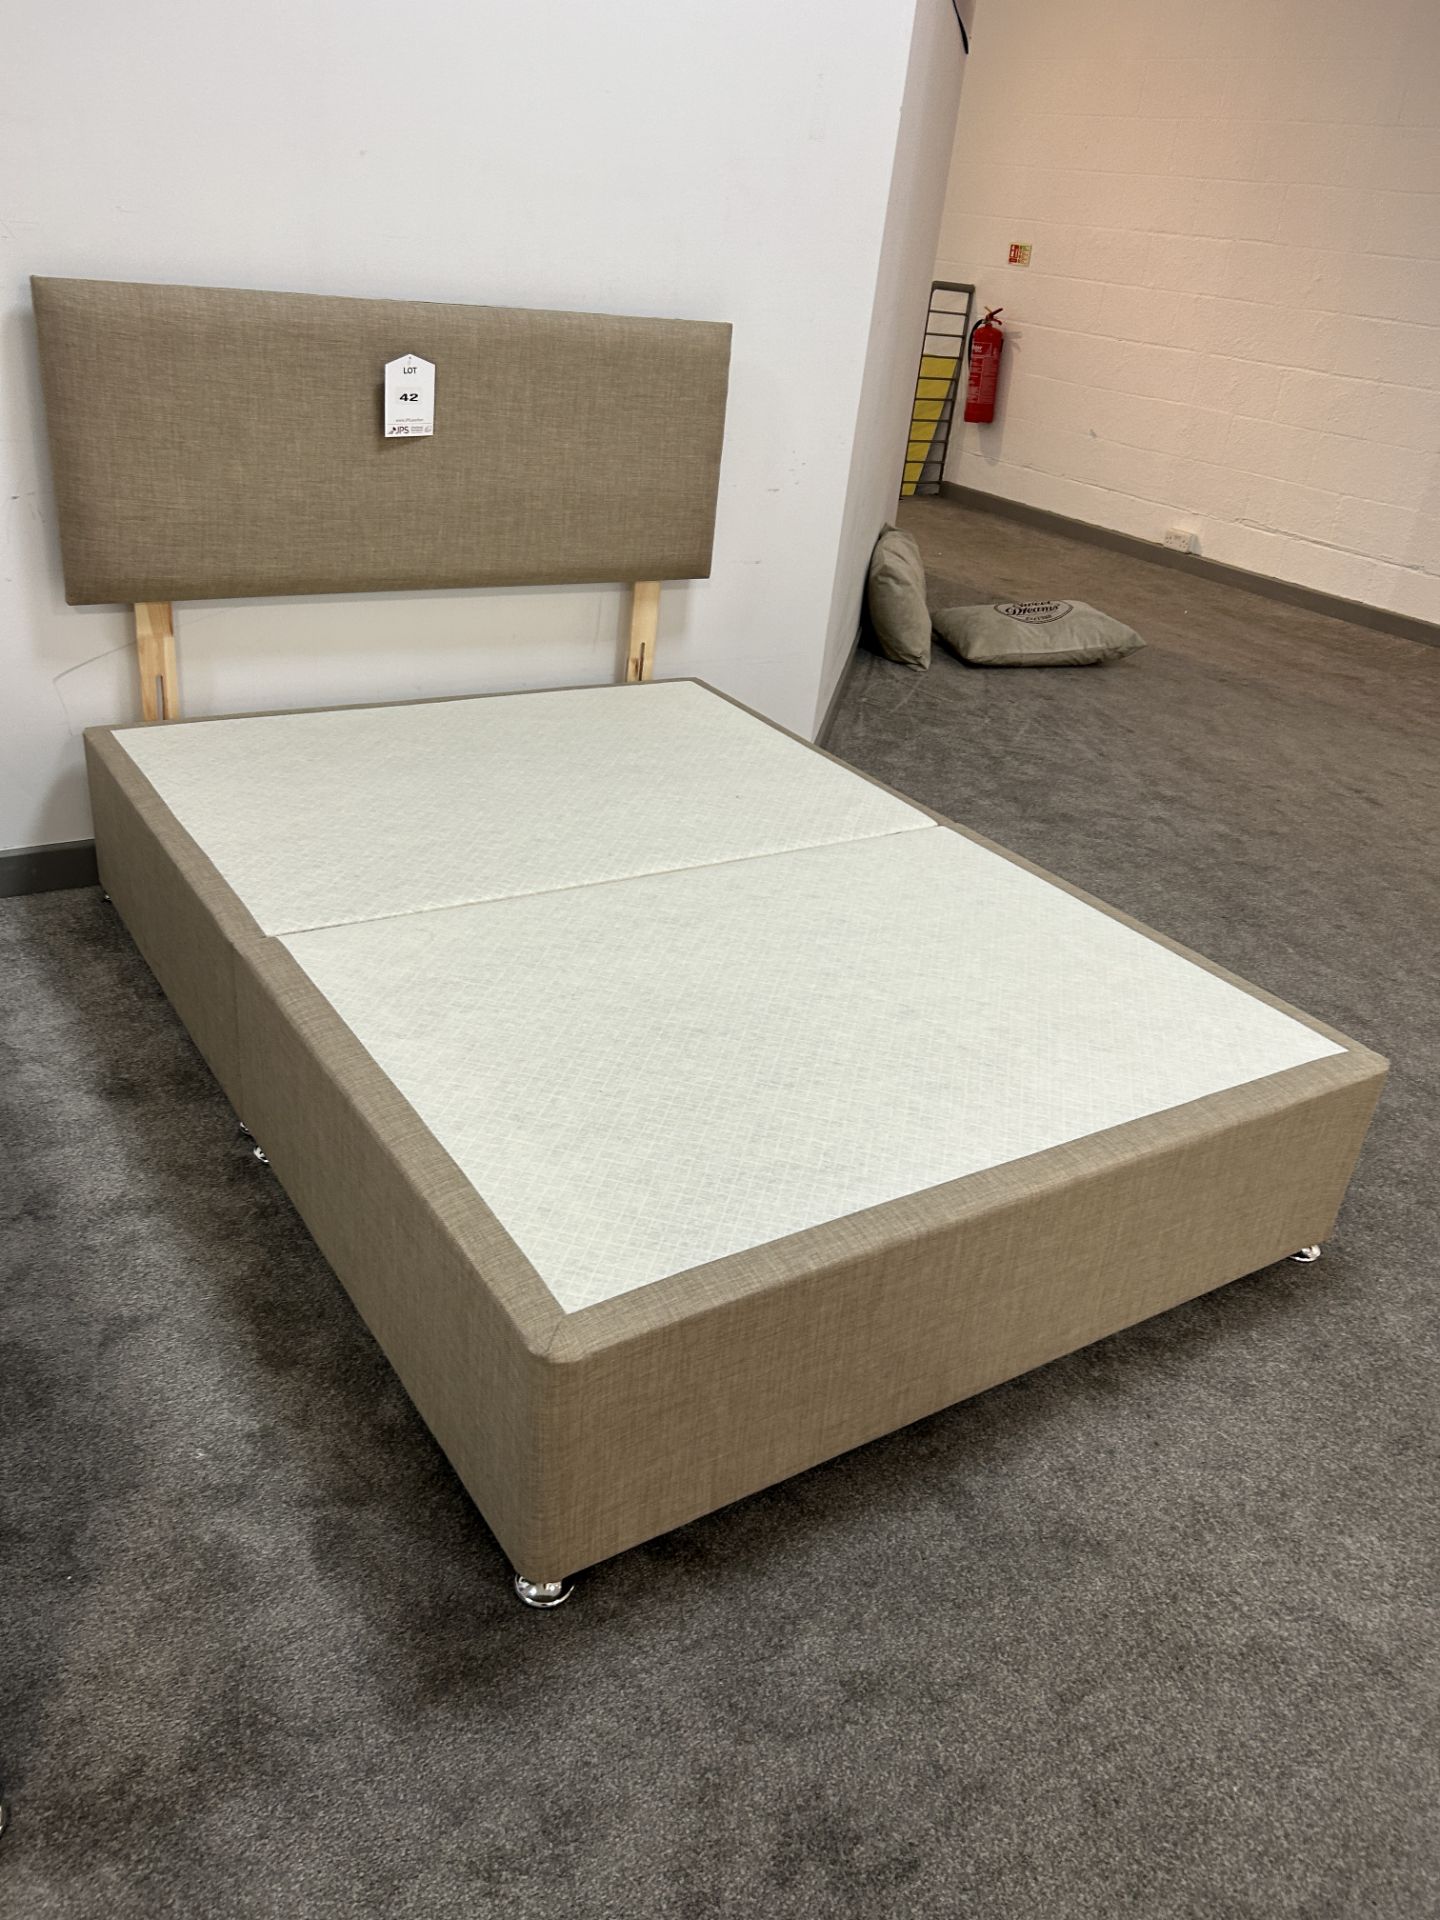 Ex-Display Double Size Bed Set incl: Base & Headboard in Beige - Image 2 of 3